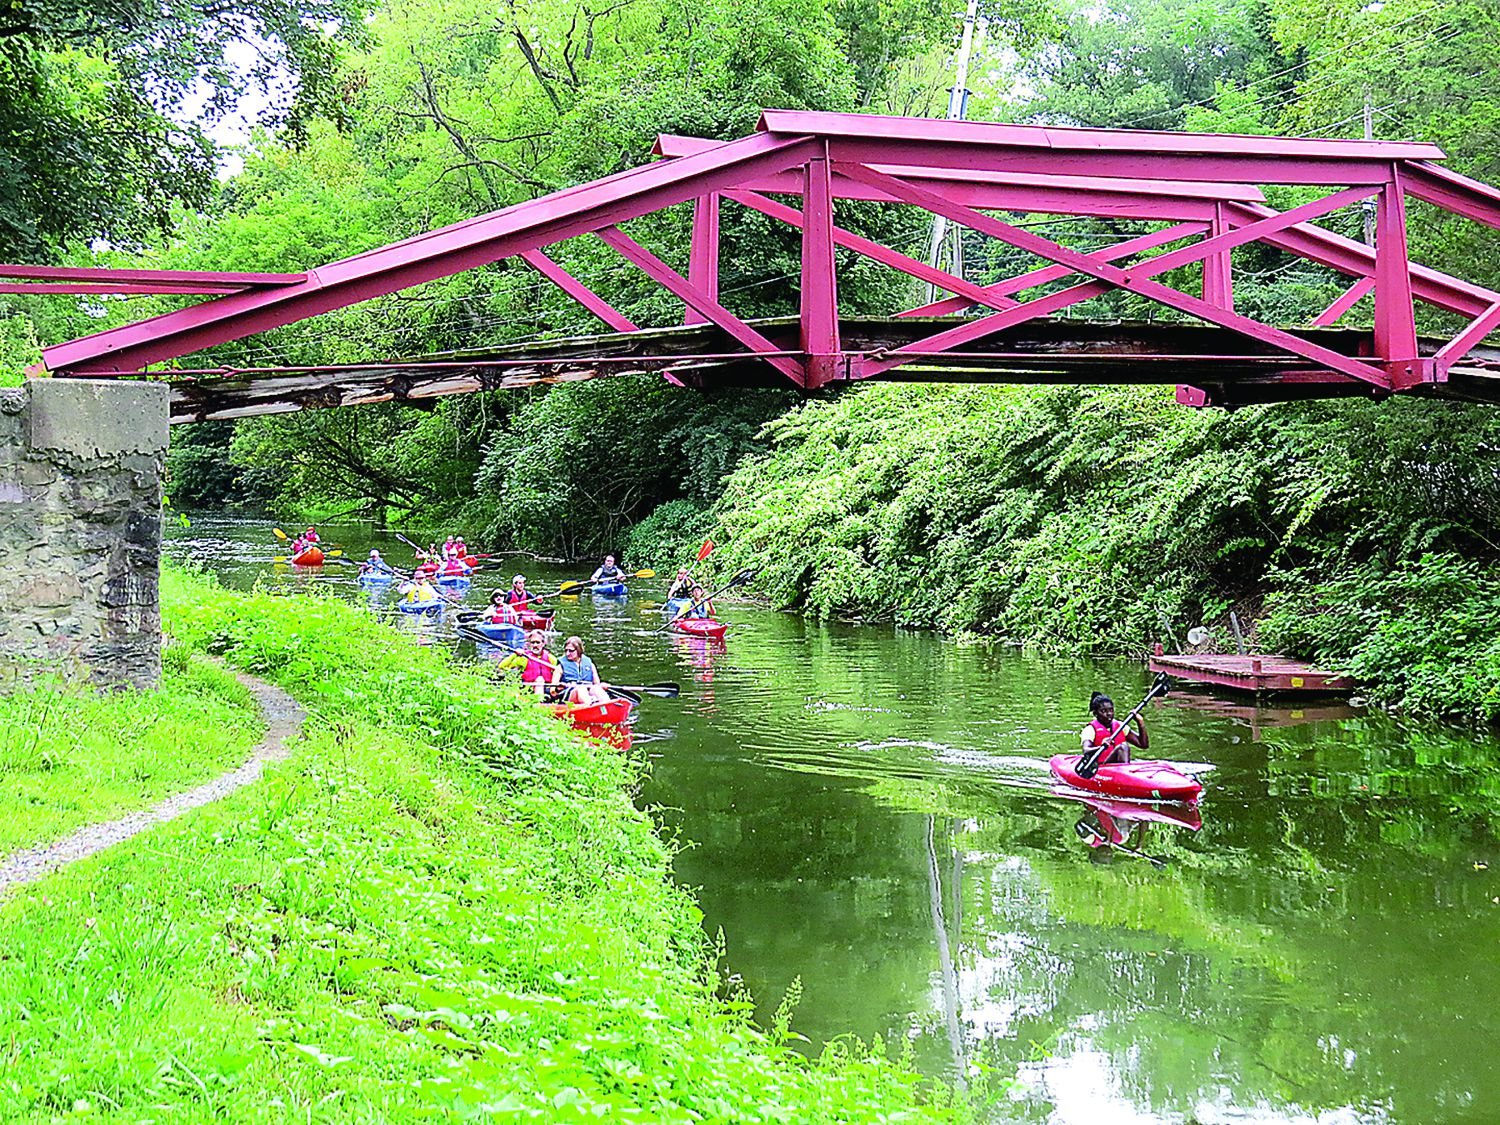 Kayaking under Woody’s Camelback Bridge on the historic Delaware Canal.